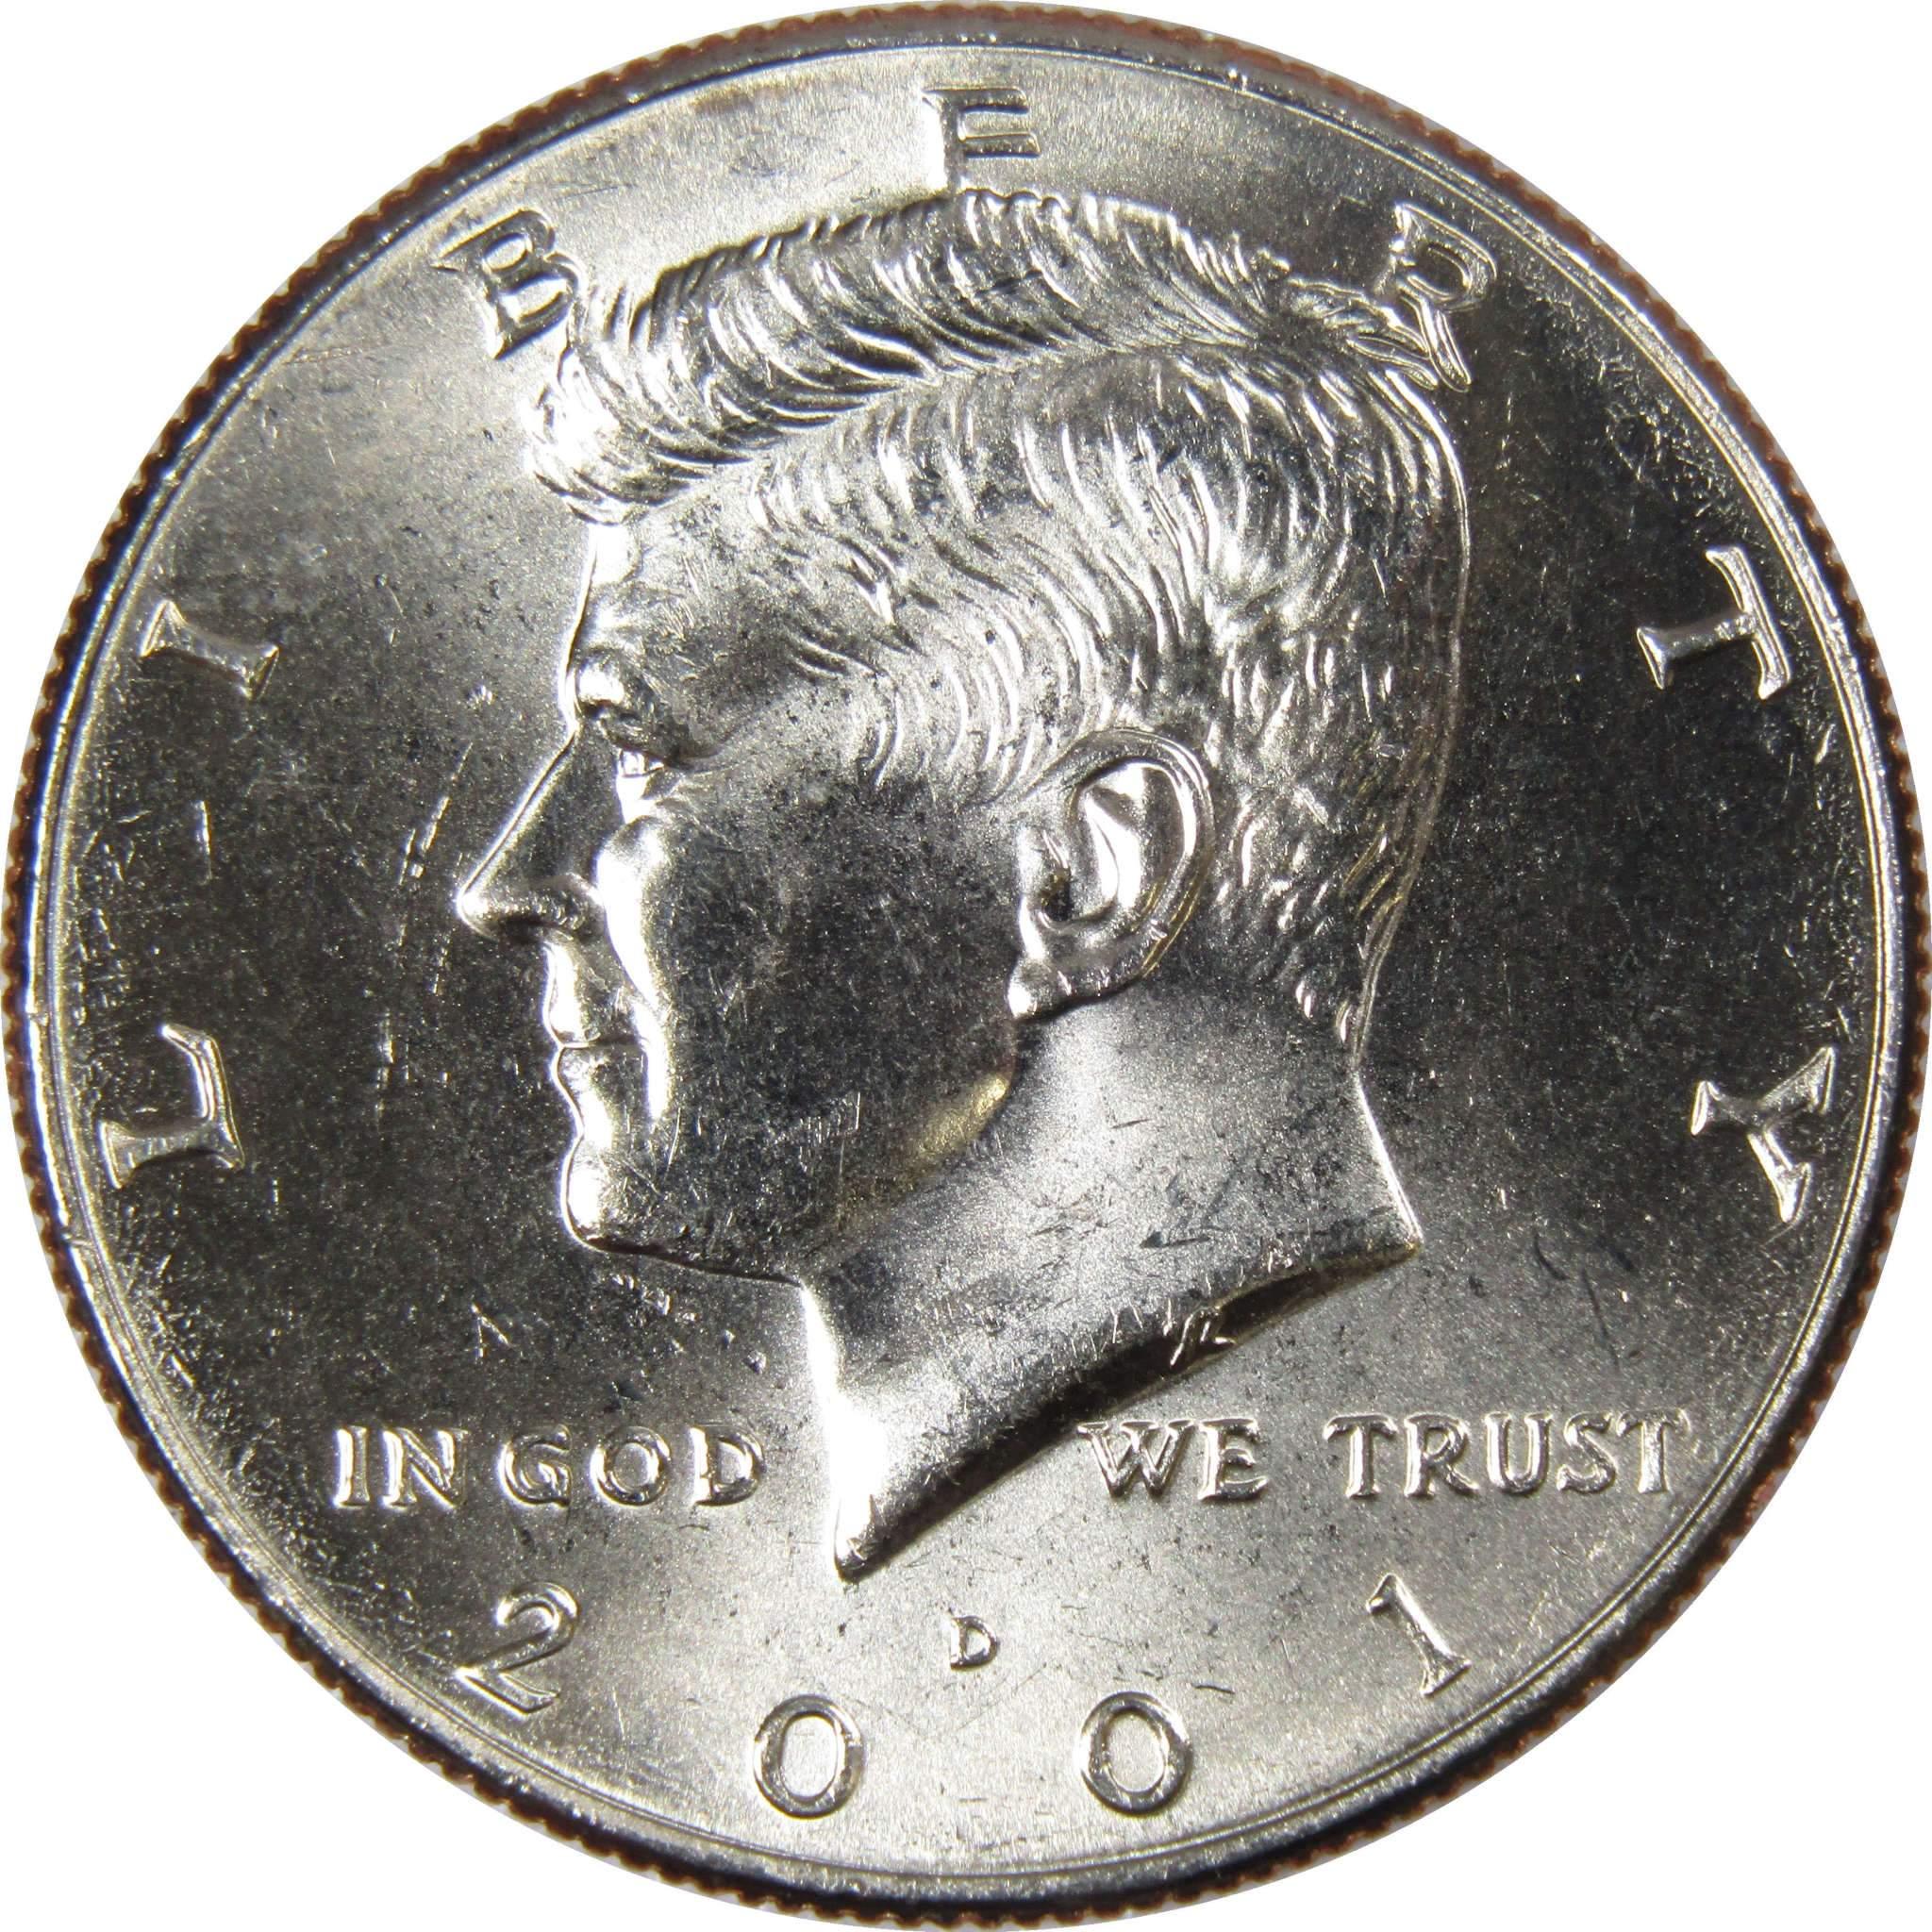 2001 D Kennedy Half Dollar BU Uncirculated Mint State 50c US Coin Collectible